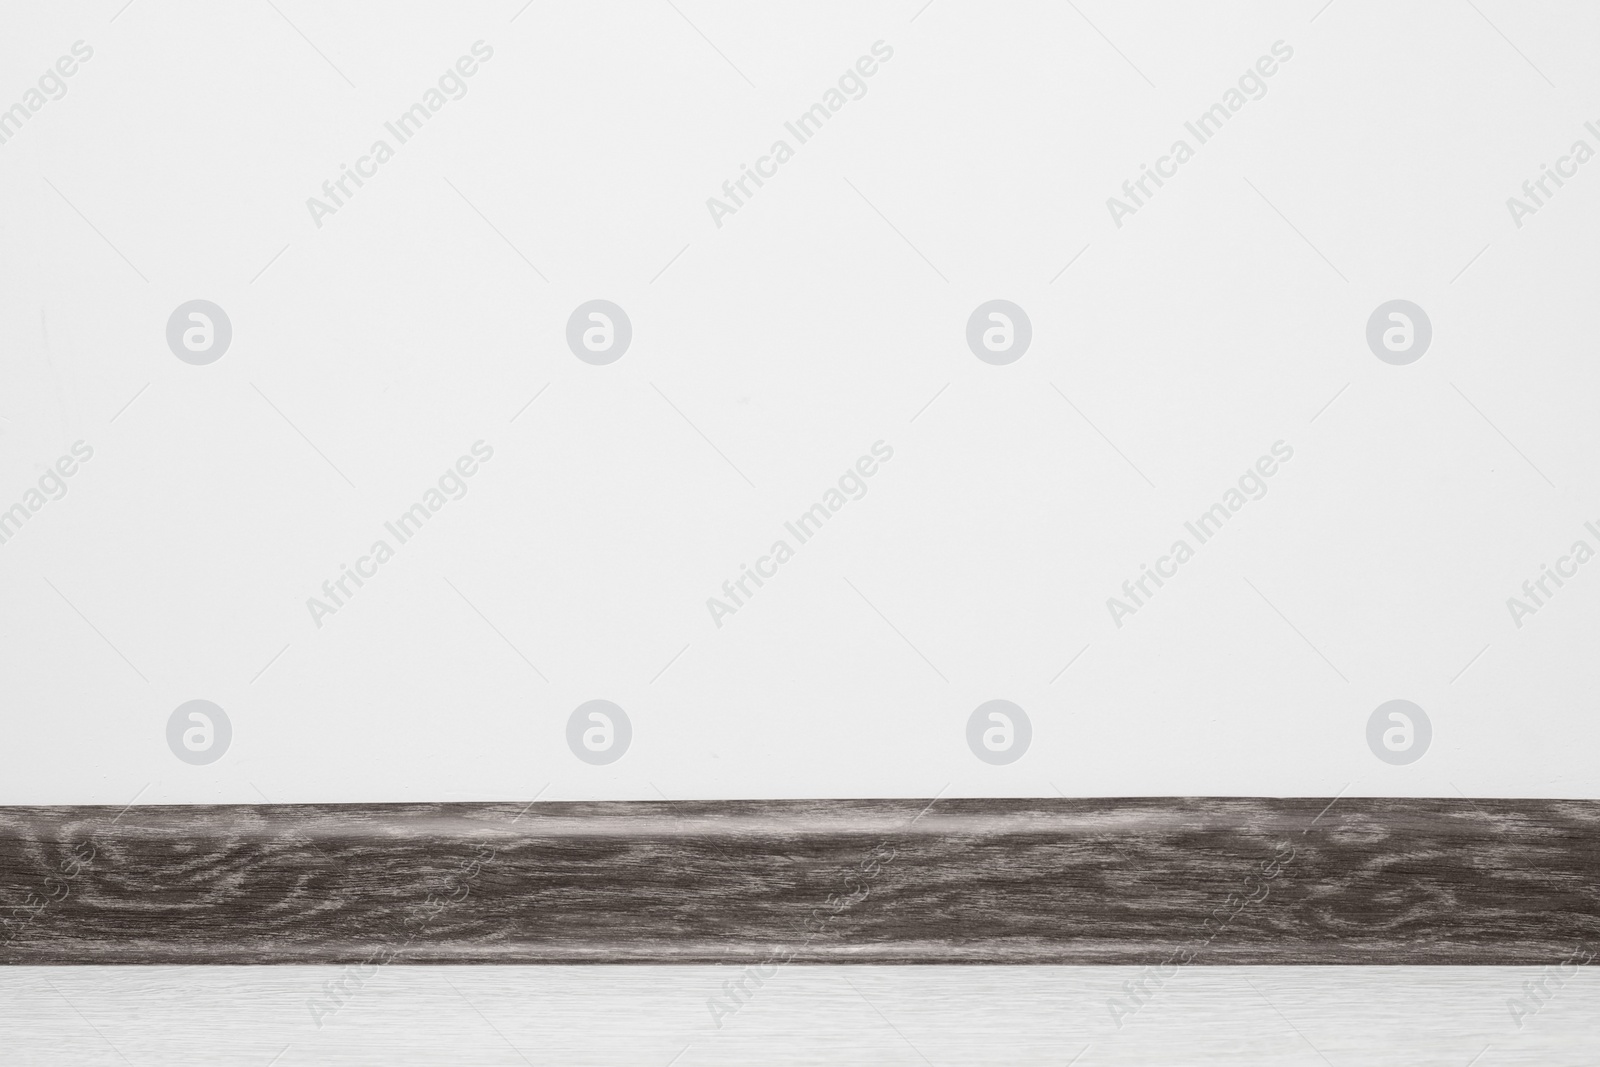 Photo of Black wooden plinth on laminated floor near white wall indoors